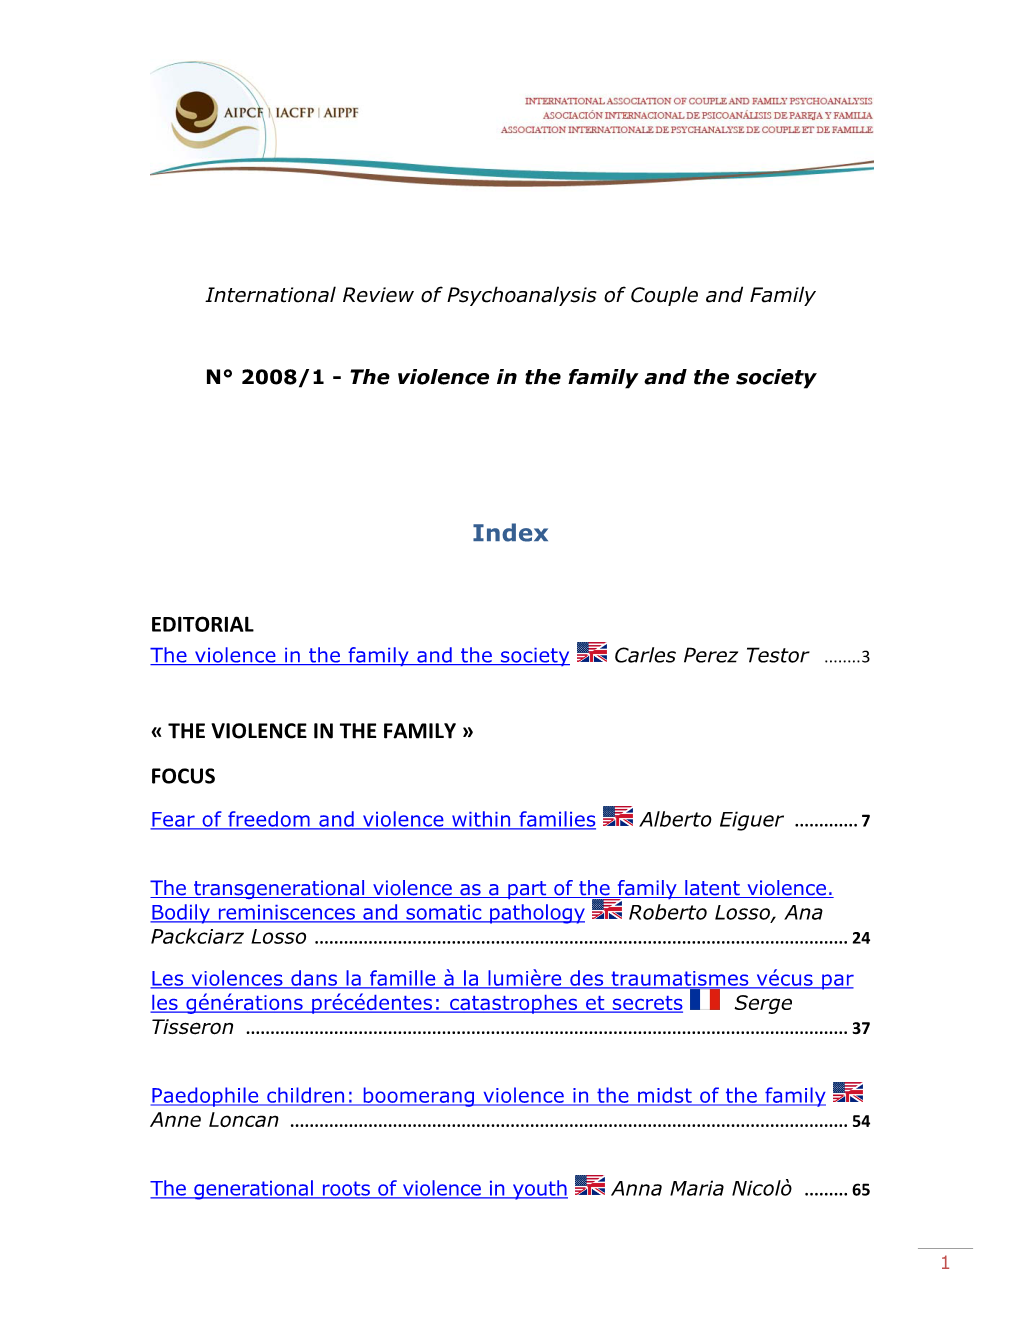 International Review of Psychoanalysis of Couple and Family N° 2008/1